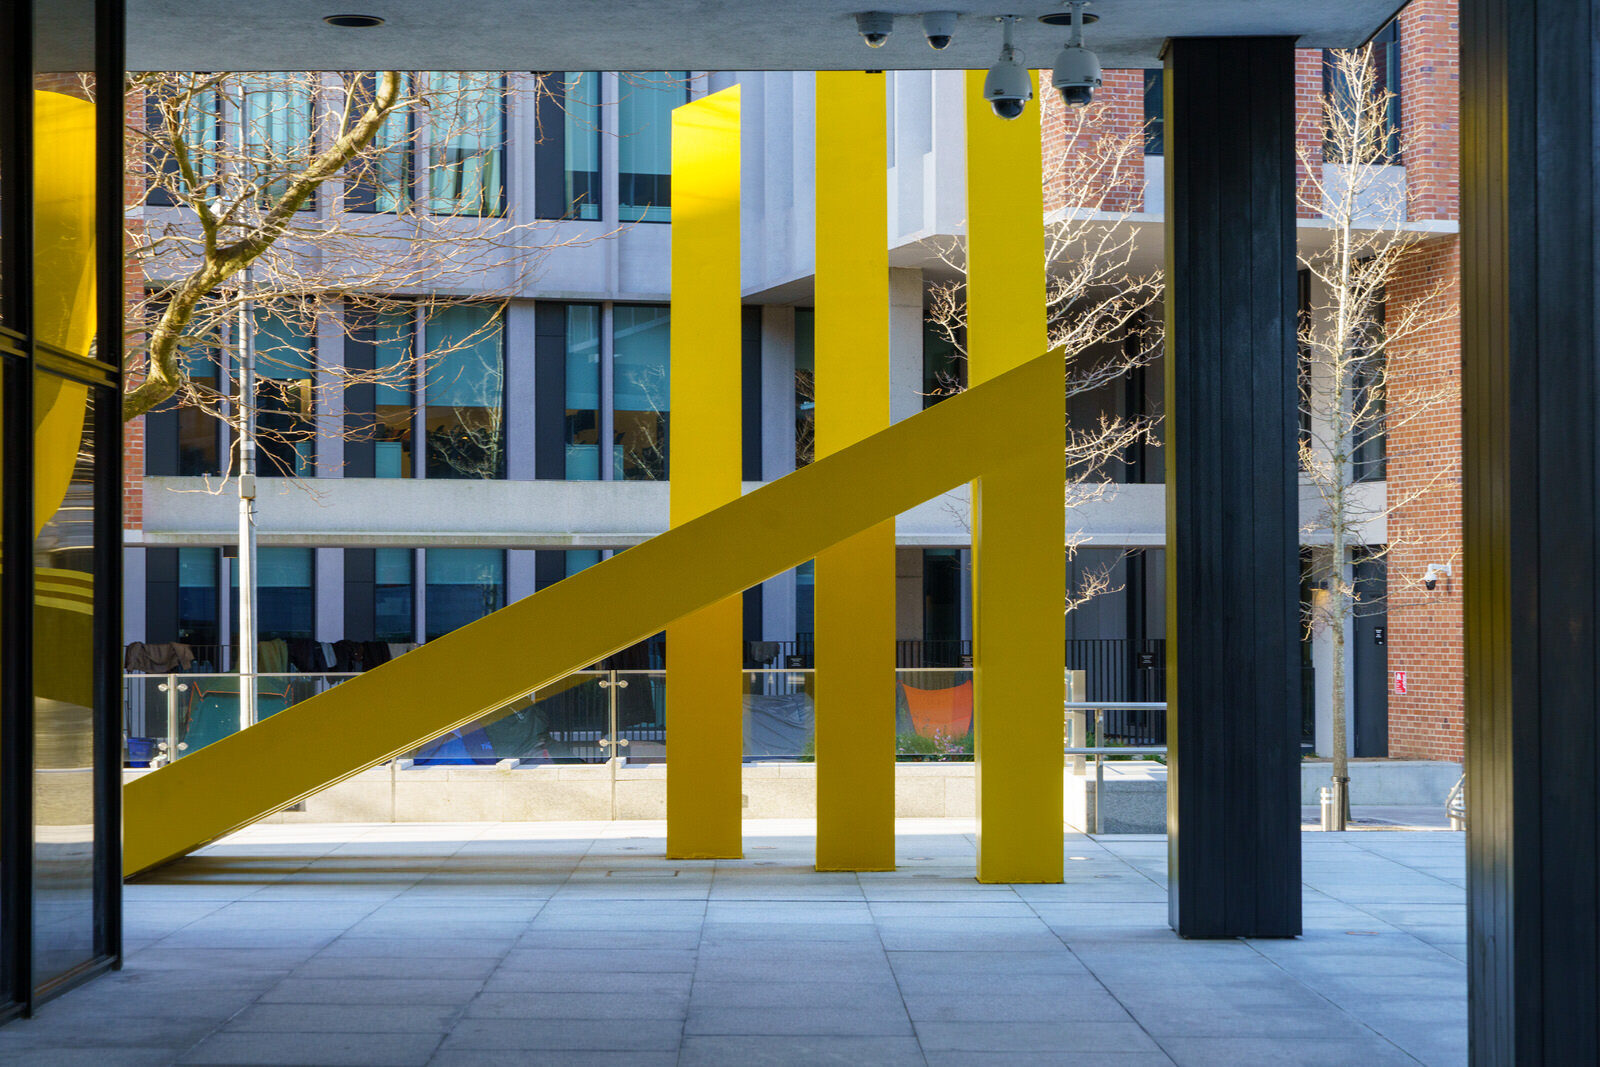 SCULPTURE BY MICHAEL BULFIN AT MIESIAN PLAZA [YELLOW STEEL GEOMETRIC REFLECTIONS]-227870-1